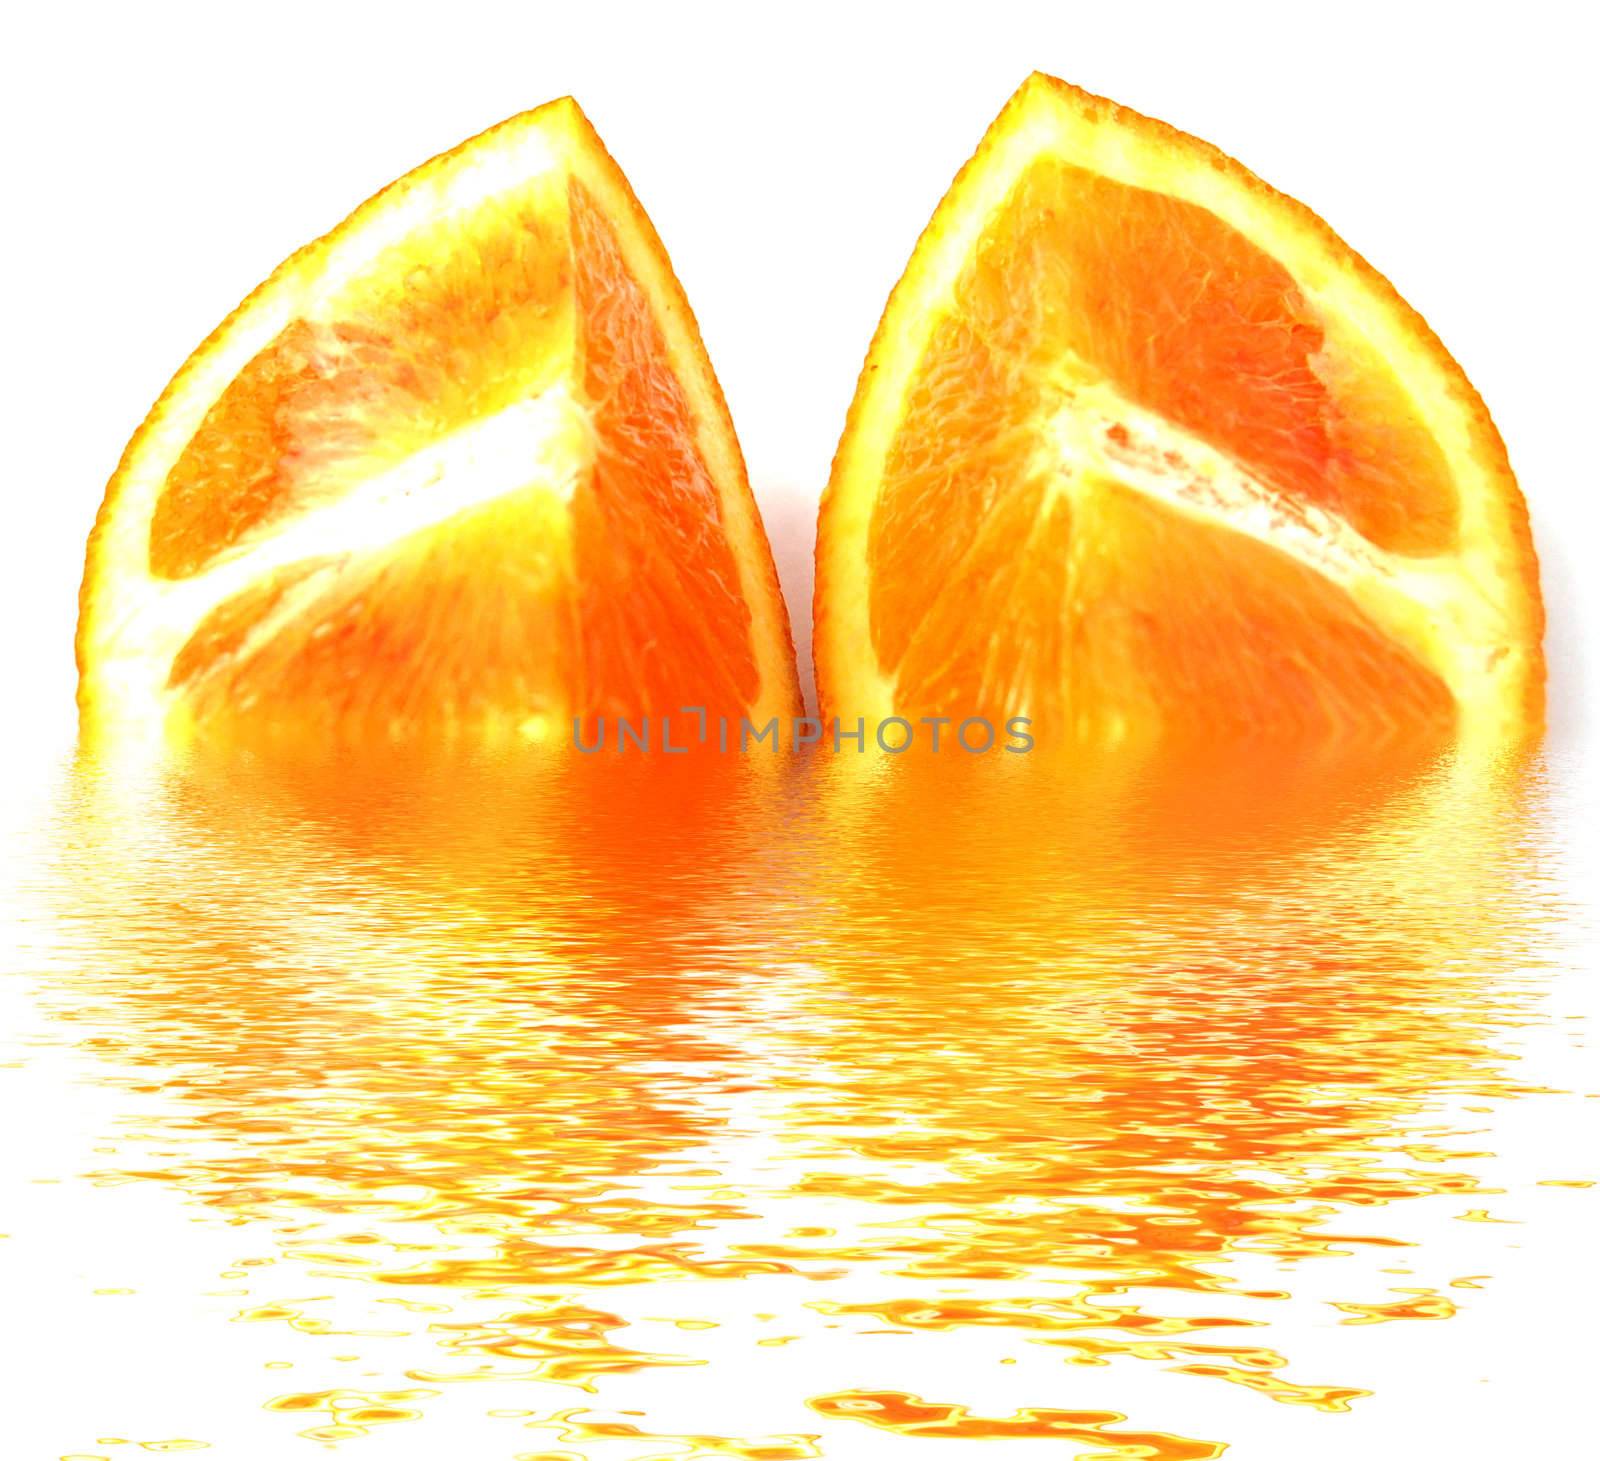 two quarters of orange with rough surface